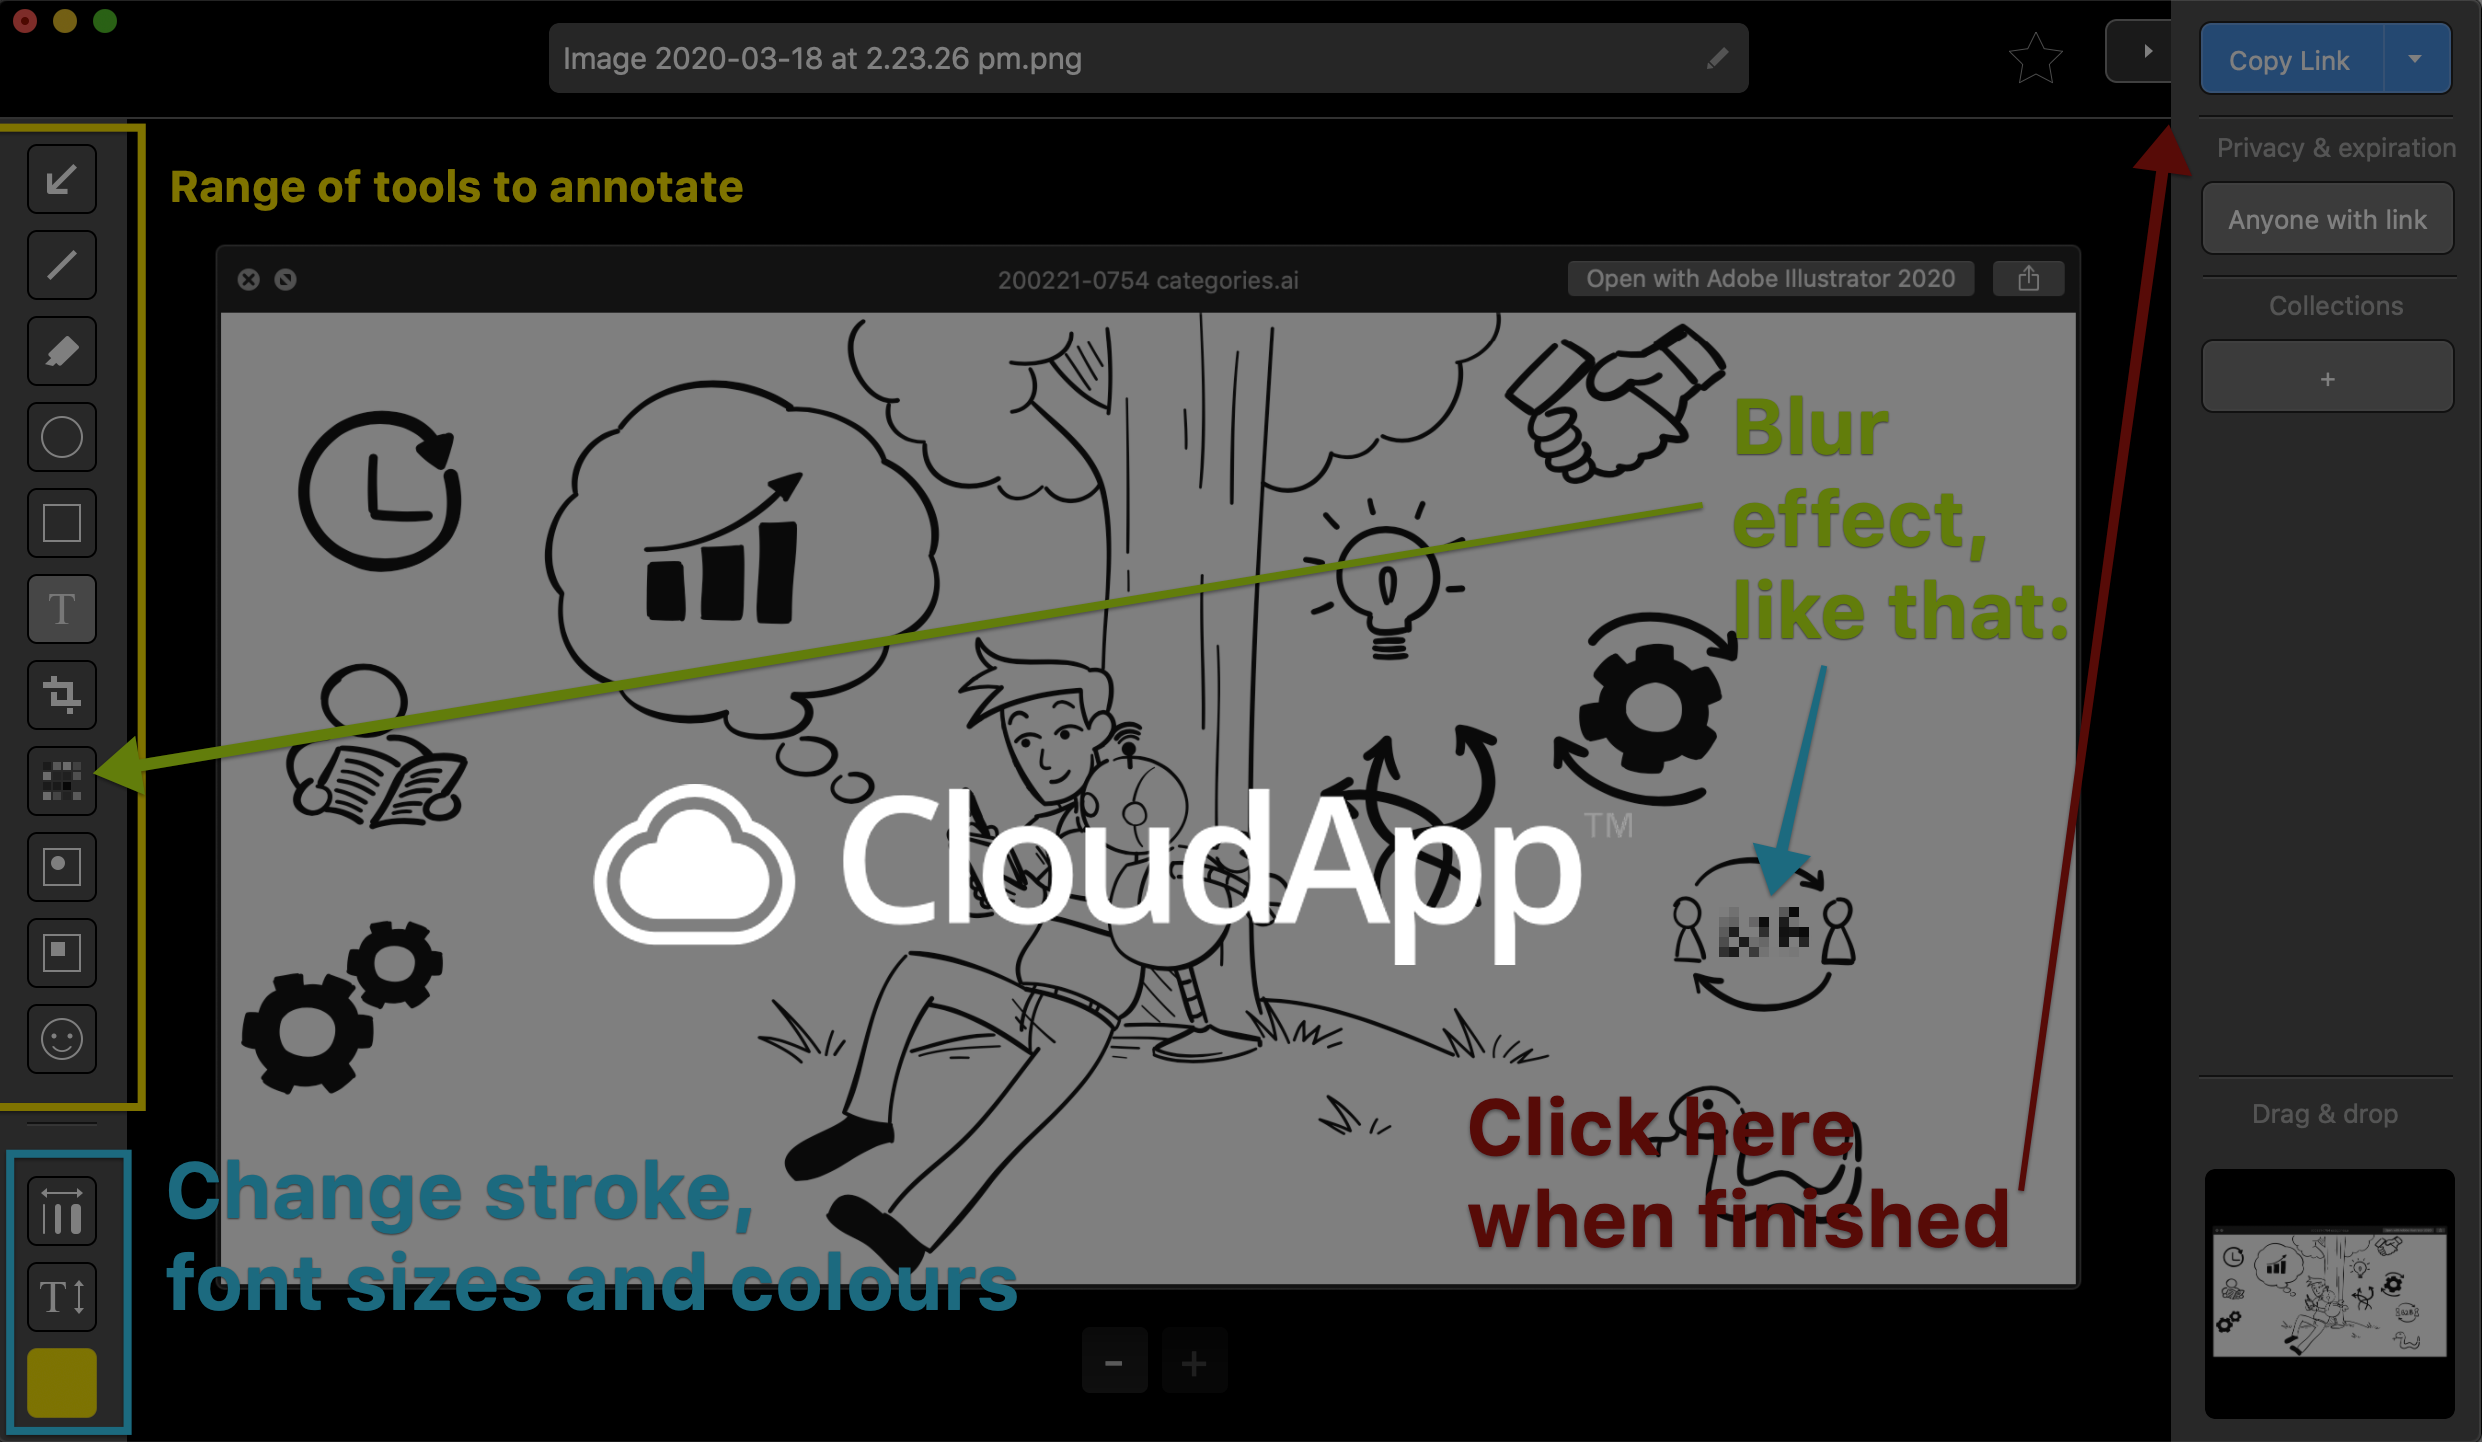 cloudapp_cover.png